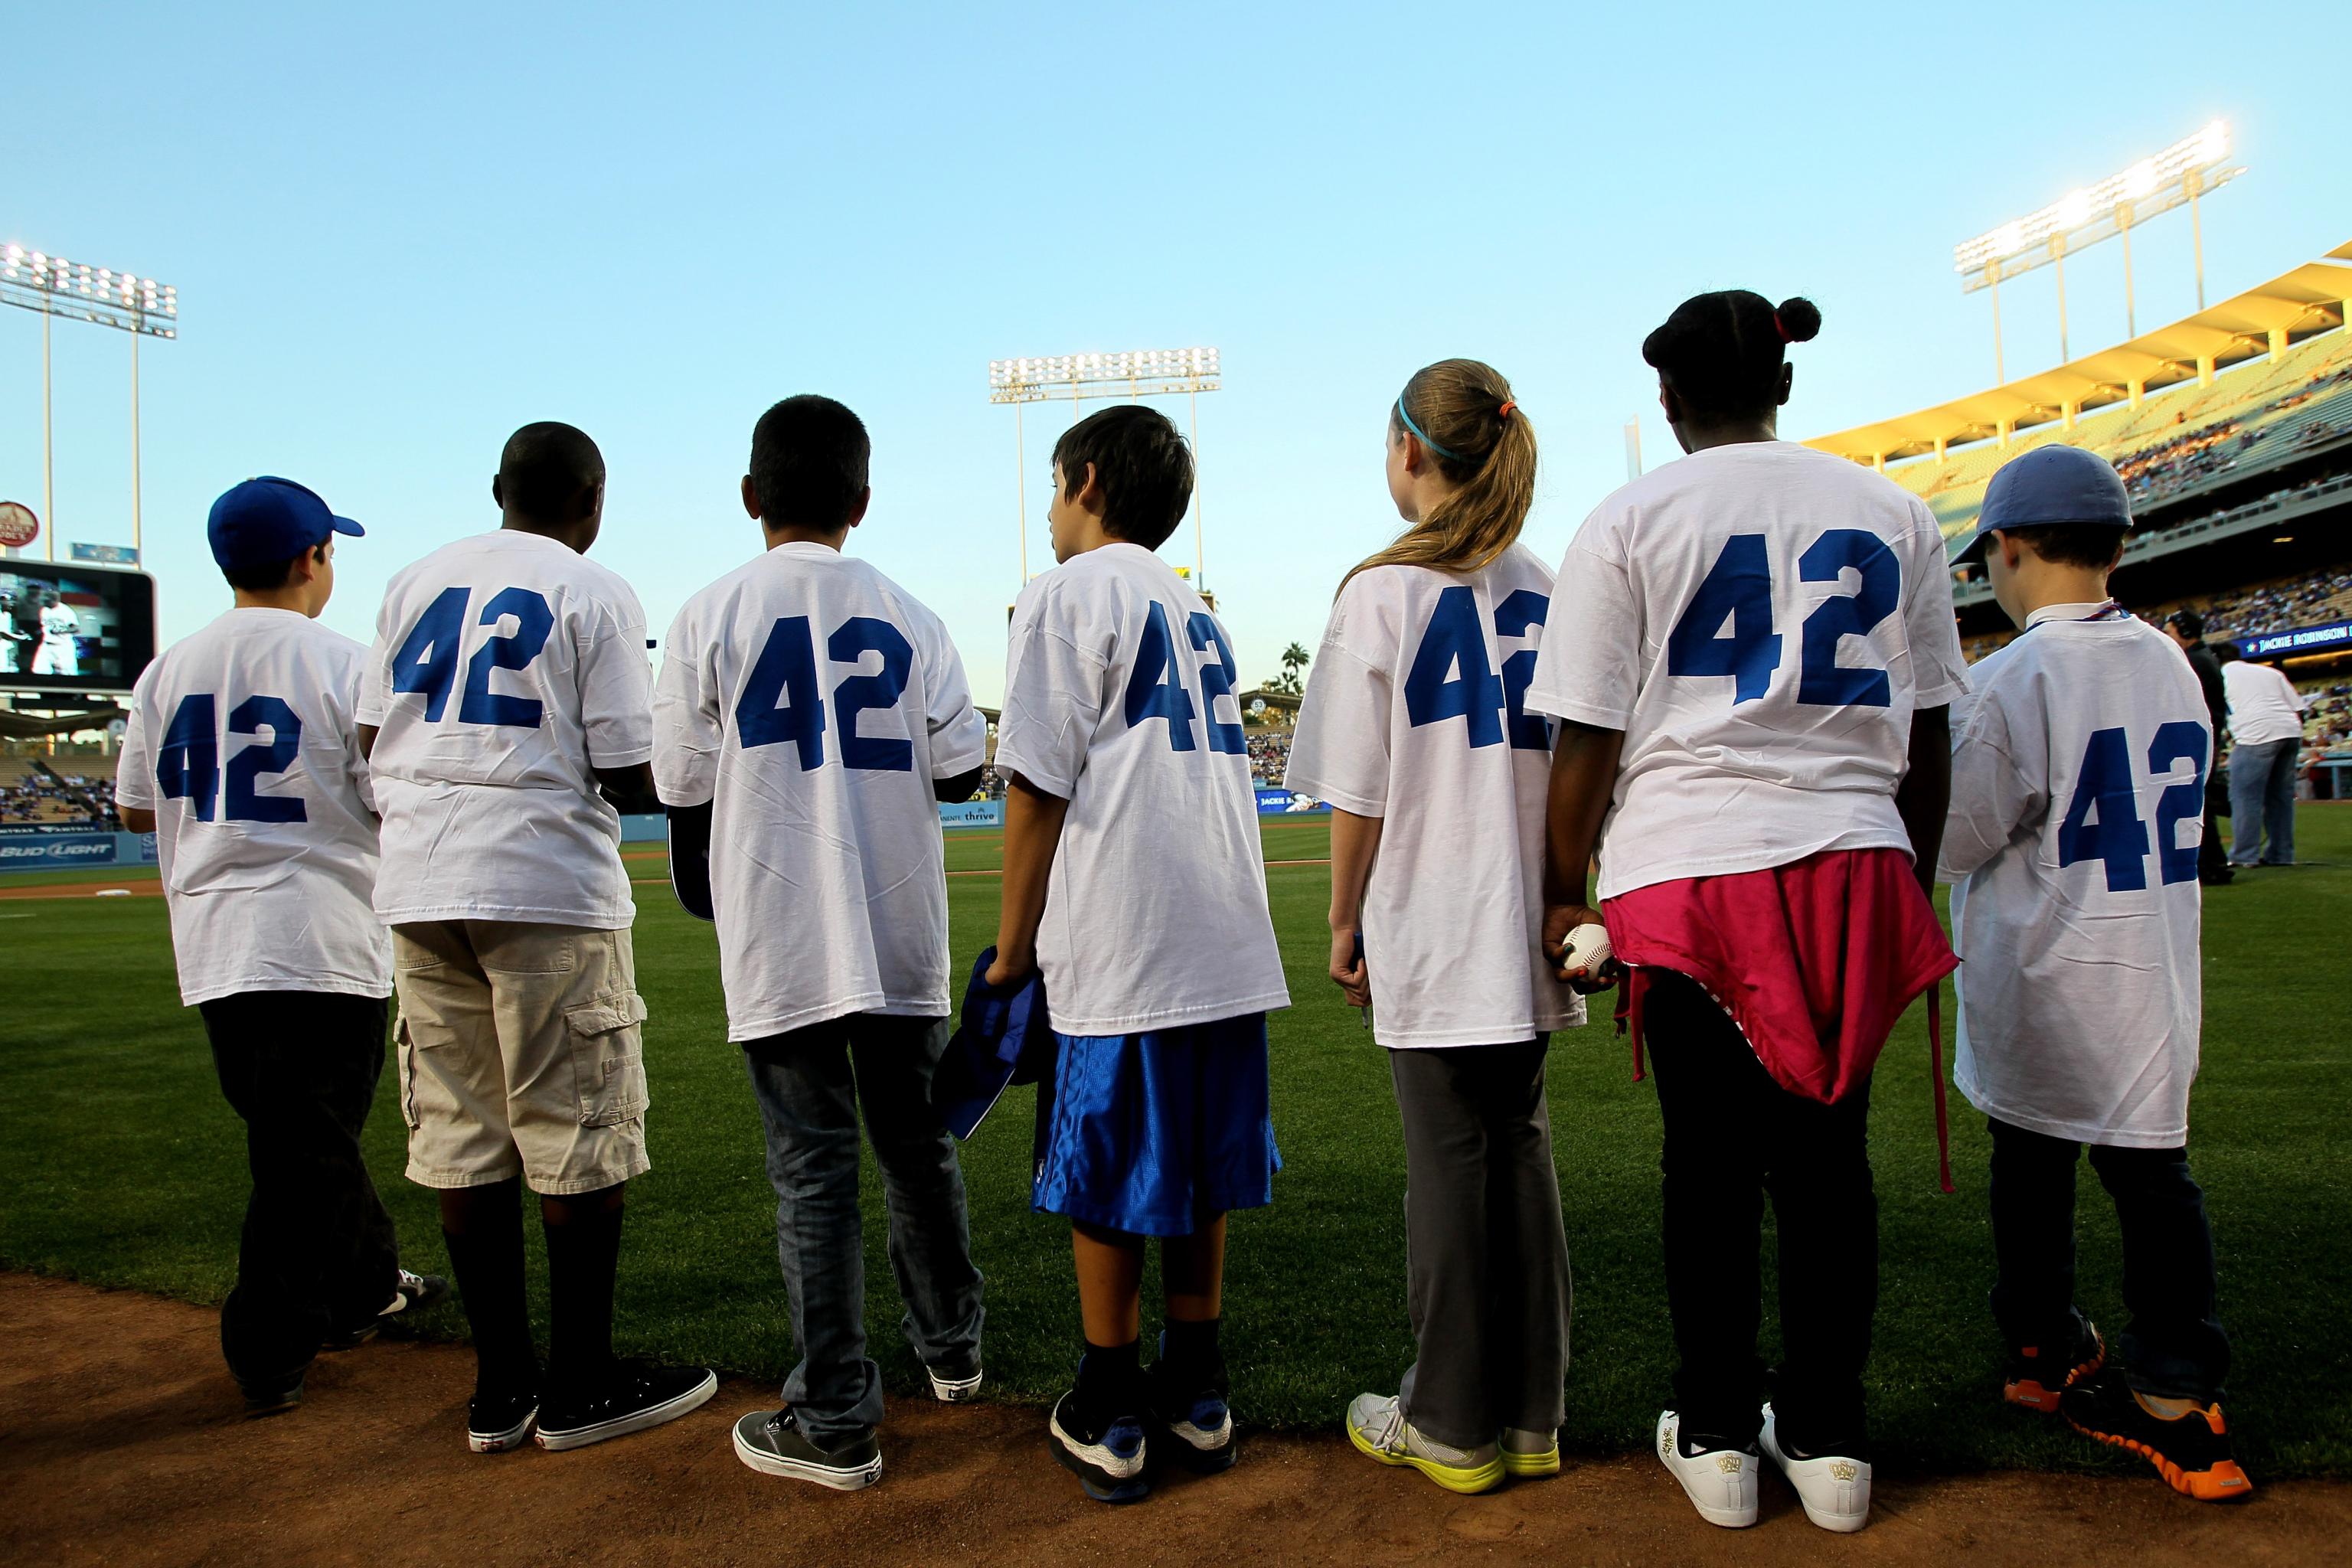 Jackie Robinson Day: Baseball Celebrates a Pioneer, but Should